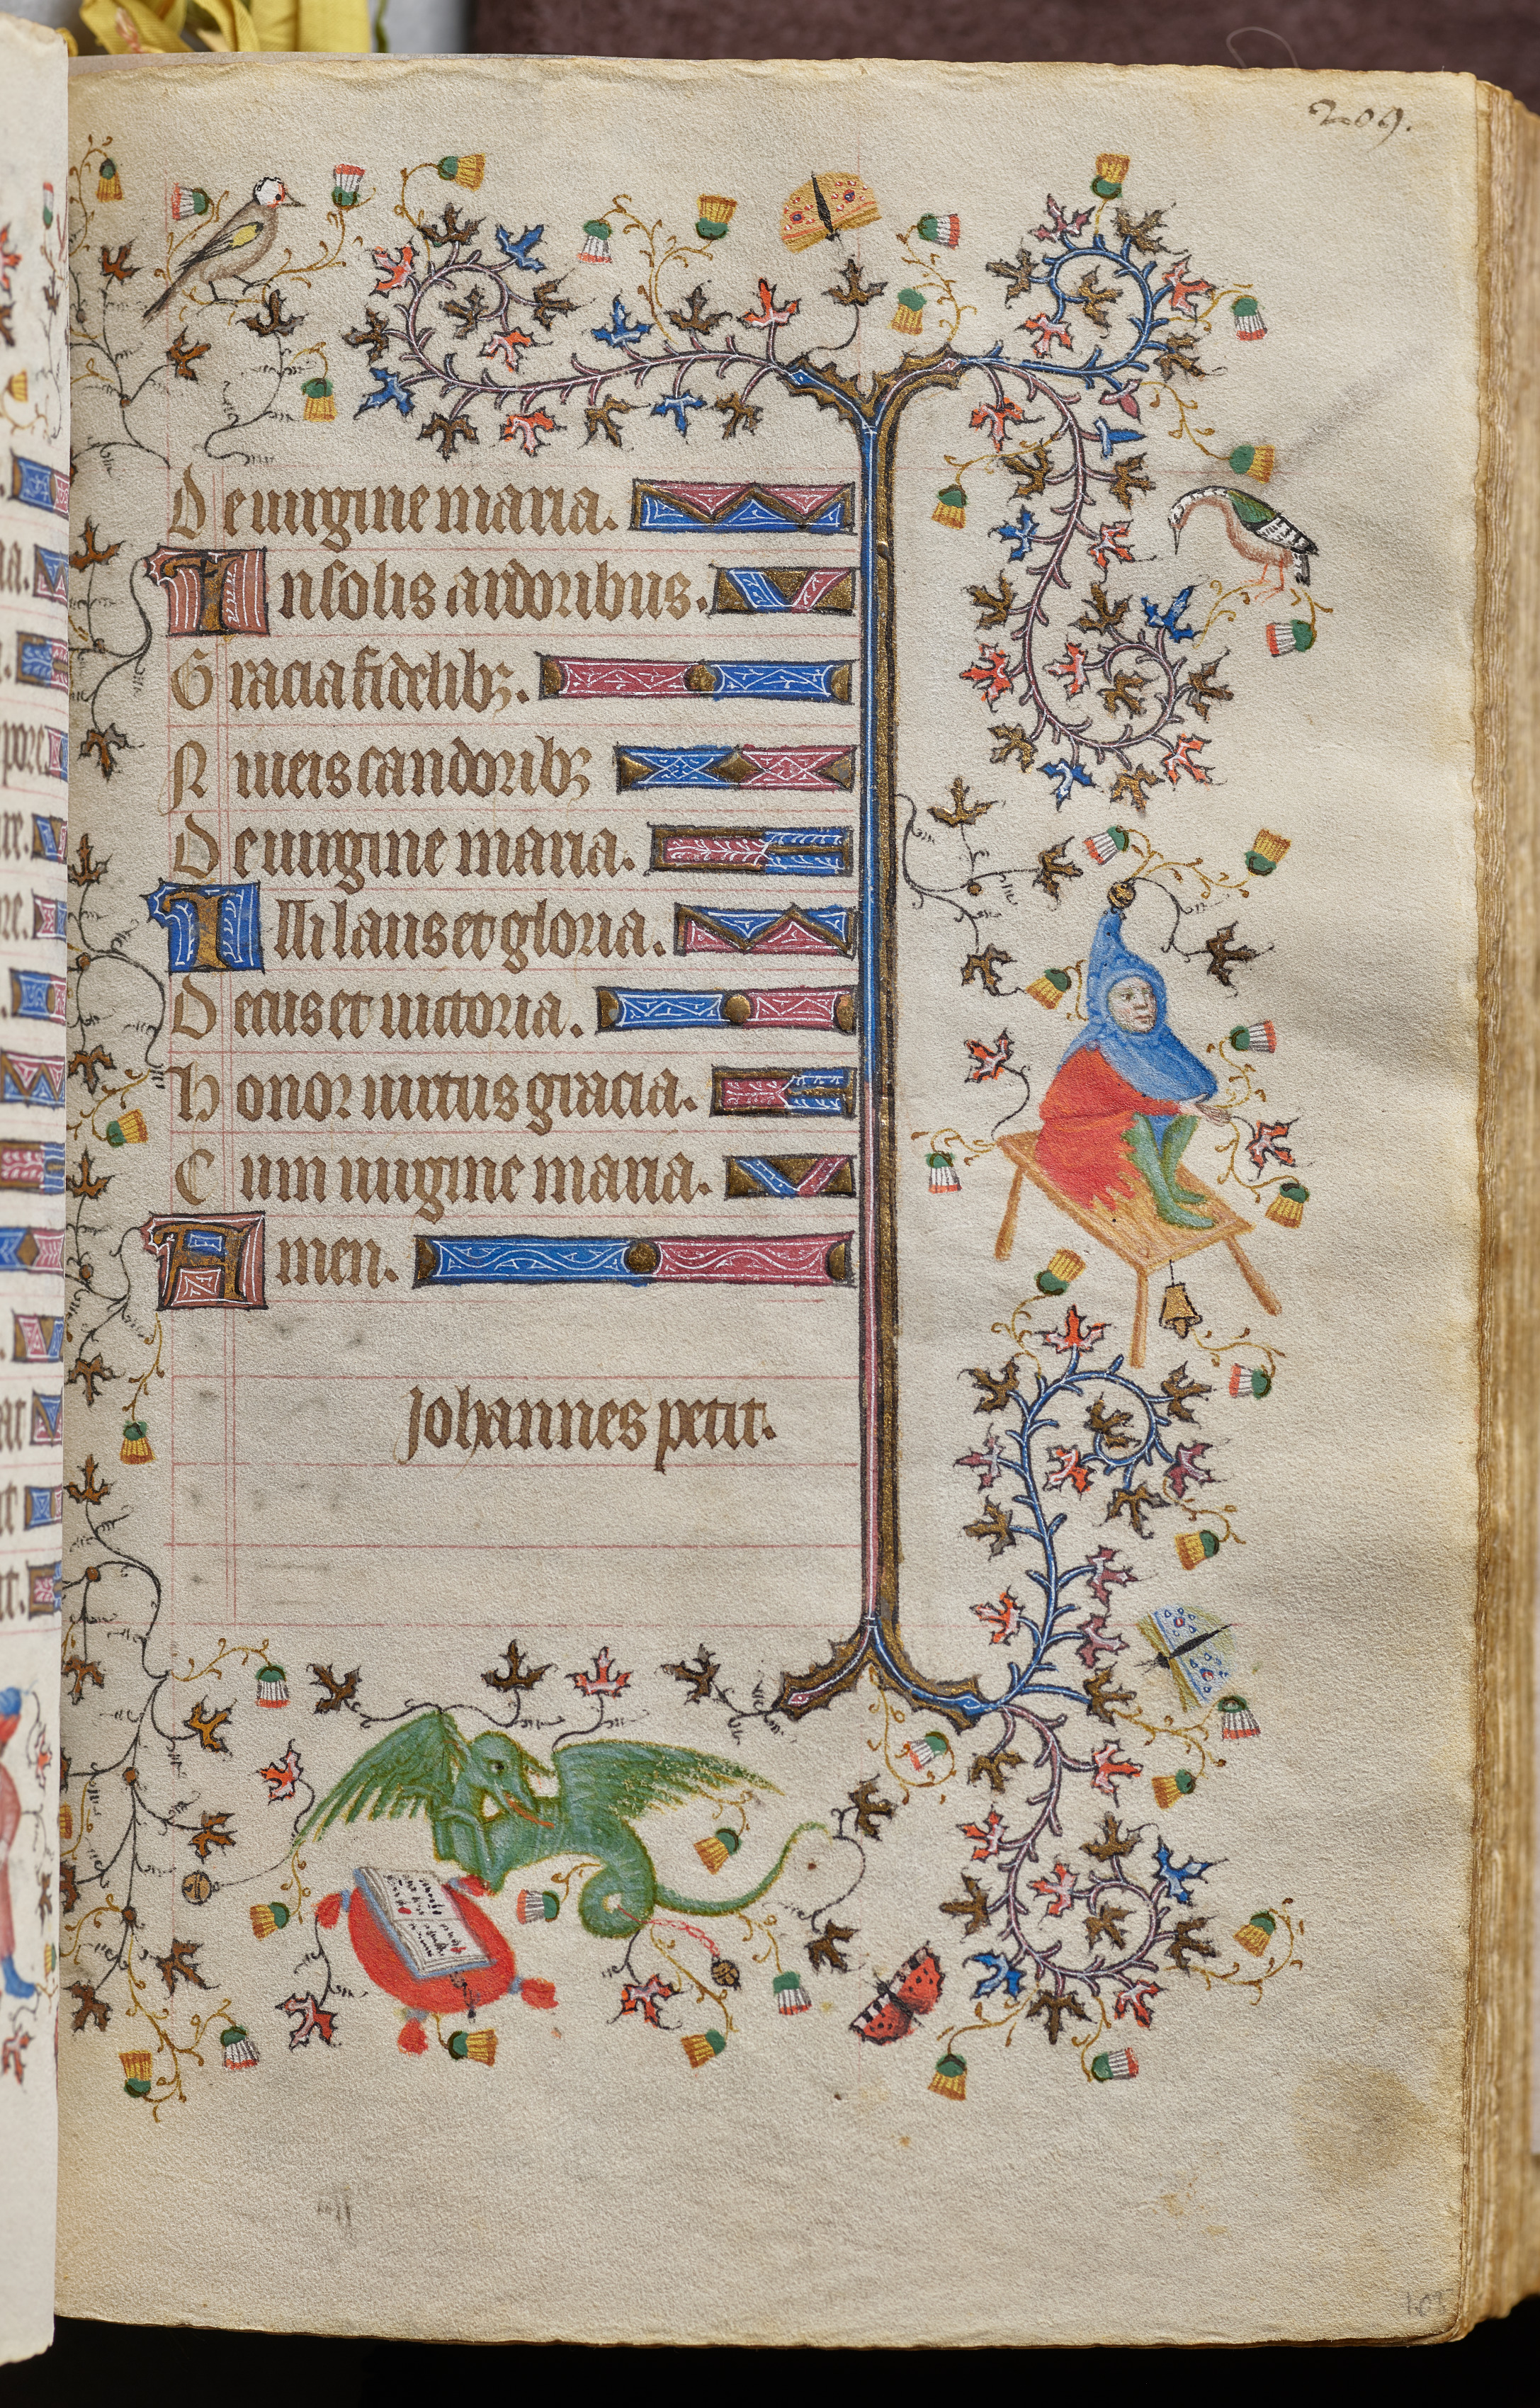 Hours of Charles the Noble, King of Navarre (1361-1425): fol. 105r, Text